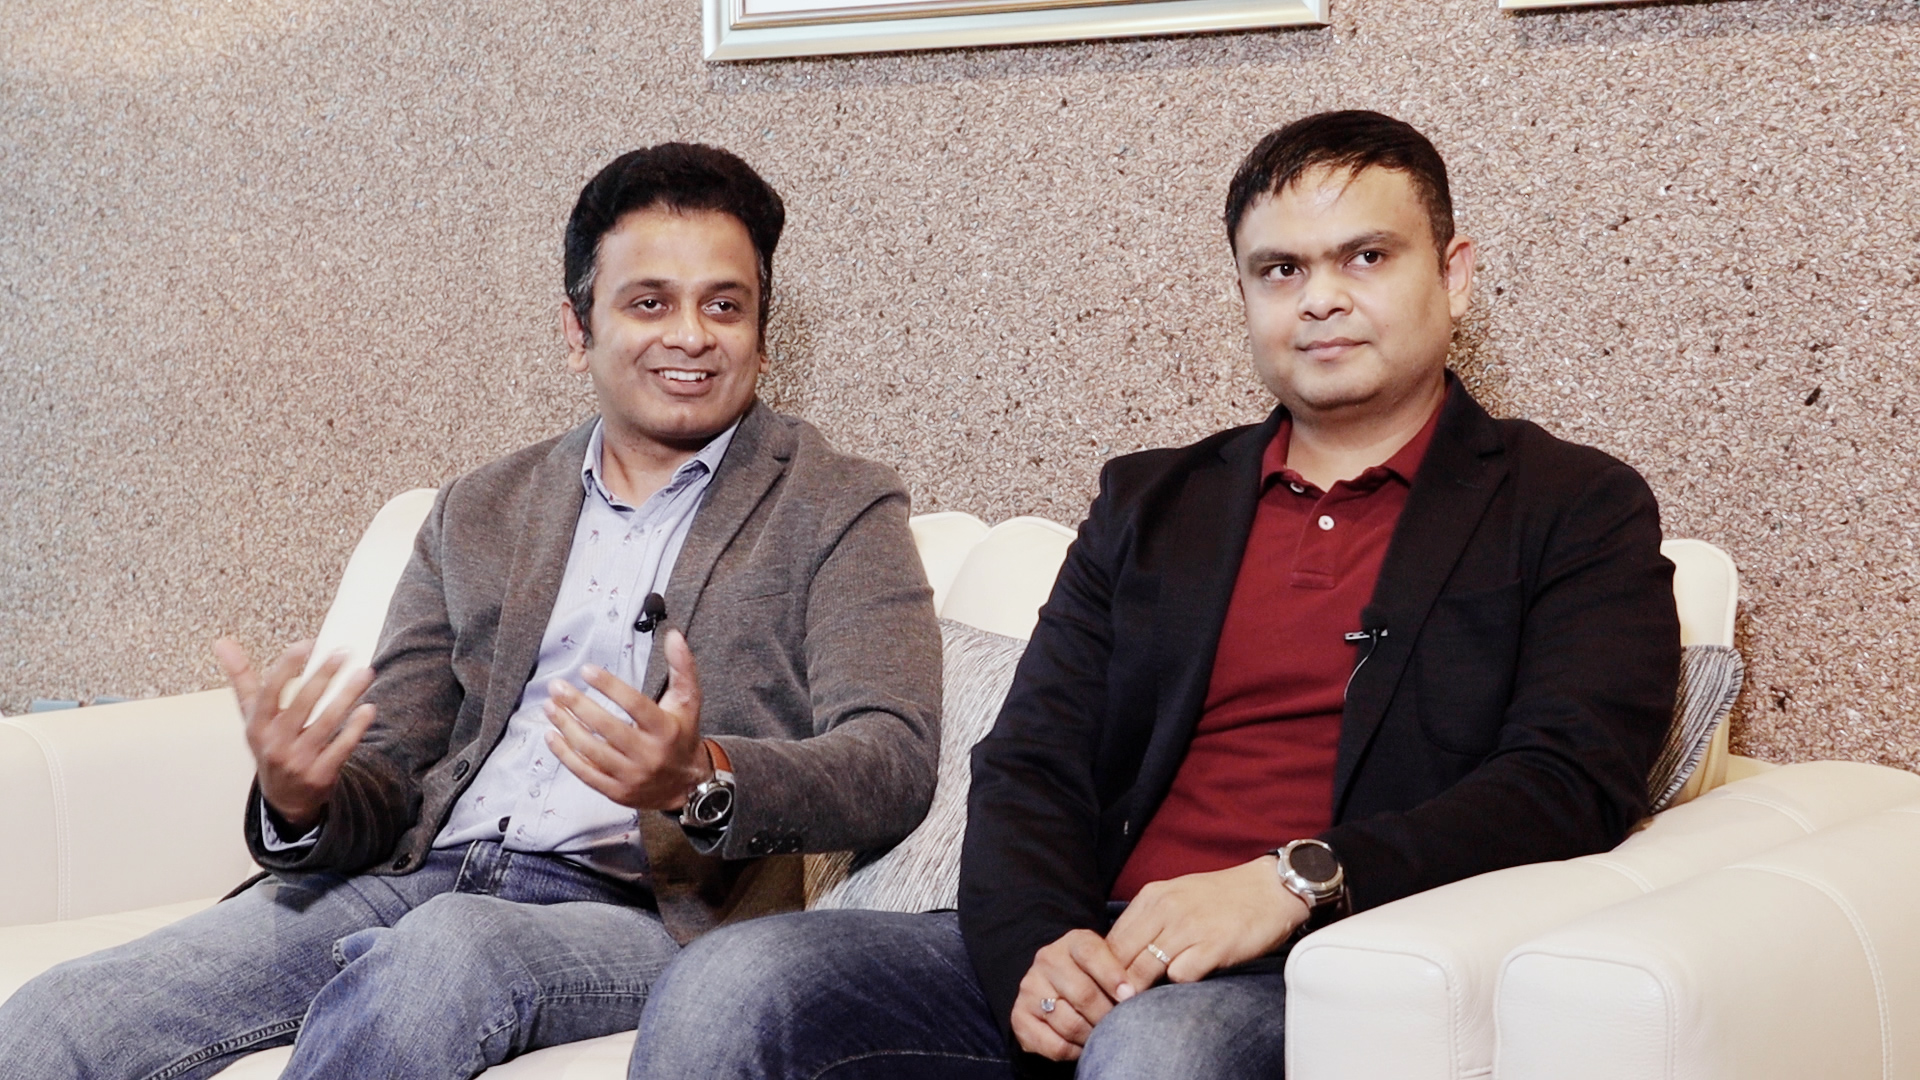 About Stockal: Interview with CEOs & Co-Founders Sitashwa Srivastava and Vinay Bharatwaj